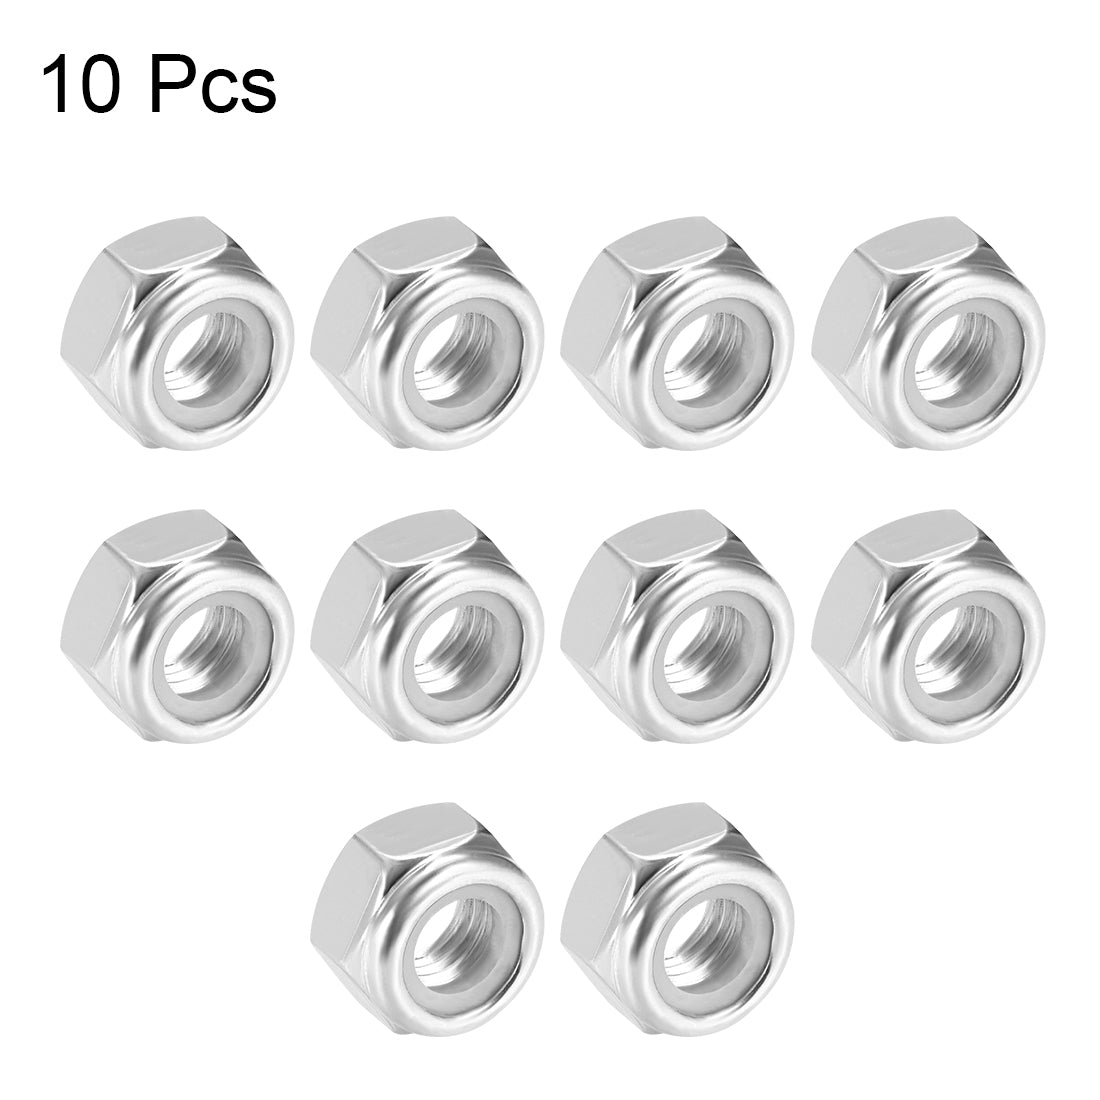 uxcell Uxcell M14 x 2mm Nylon Insert Hex Lock Nuts, Carbon Steel White Zinc Plated, 10 Pcs